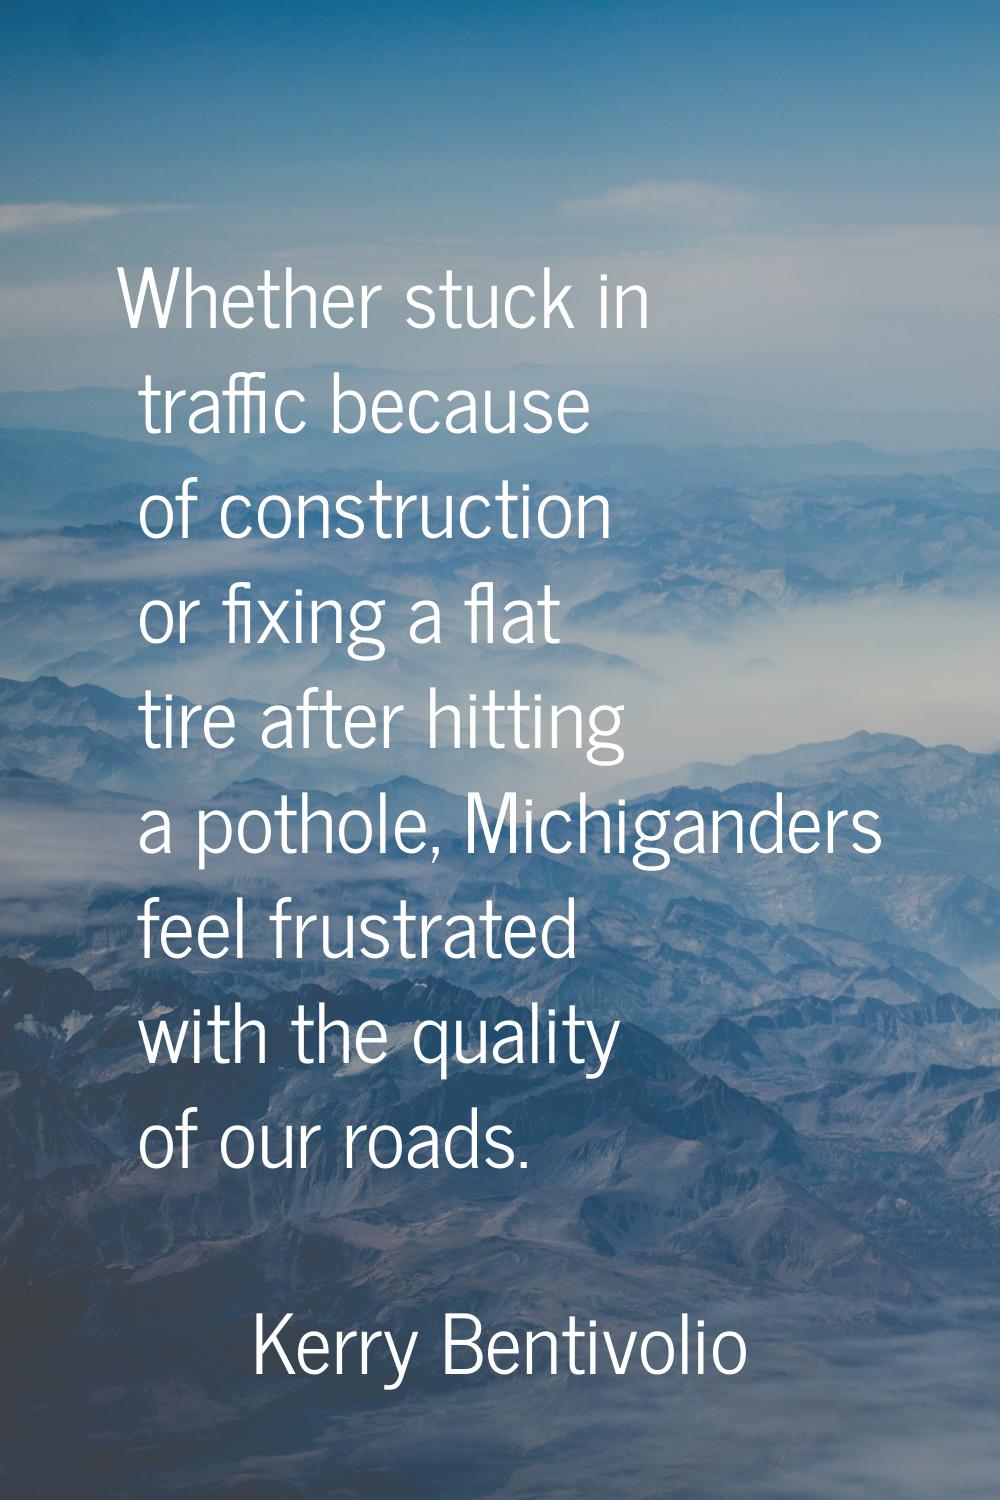 Whether stuck in traffic because of construction or fixing a flat tire after hitting a pothole, Mic